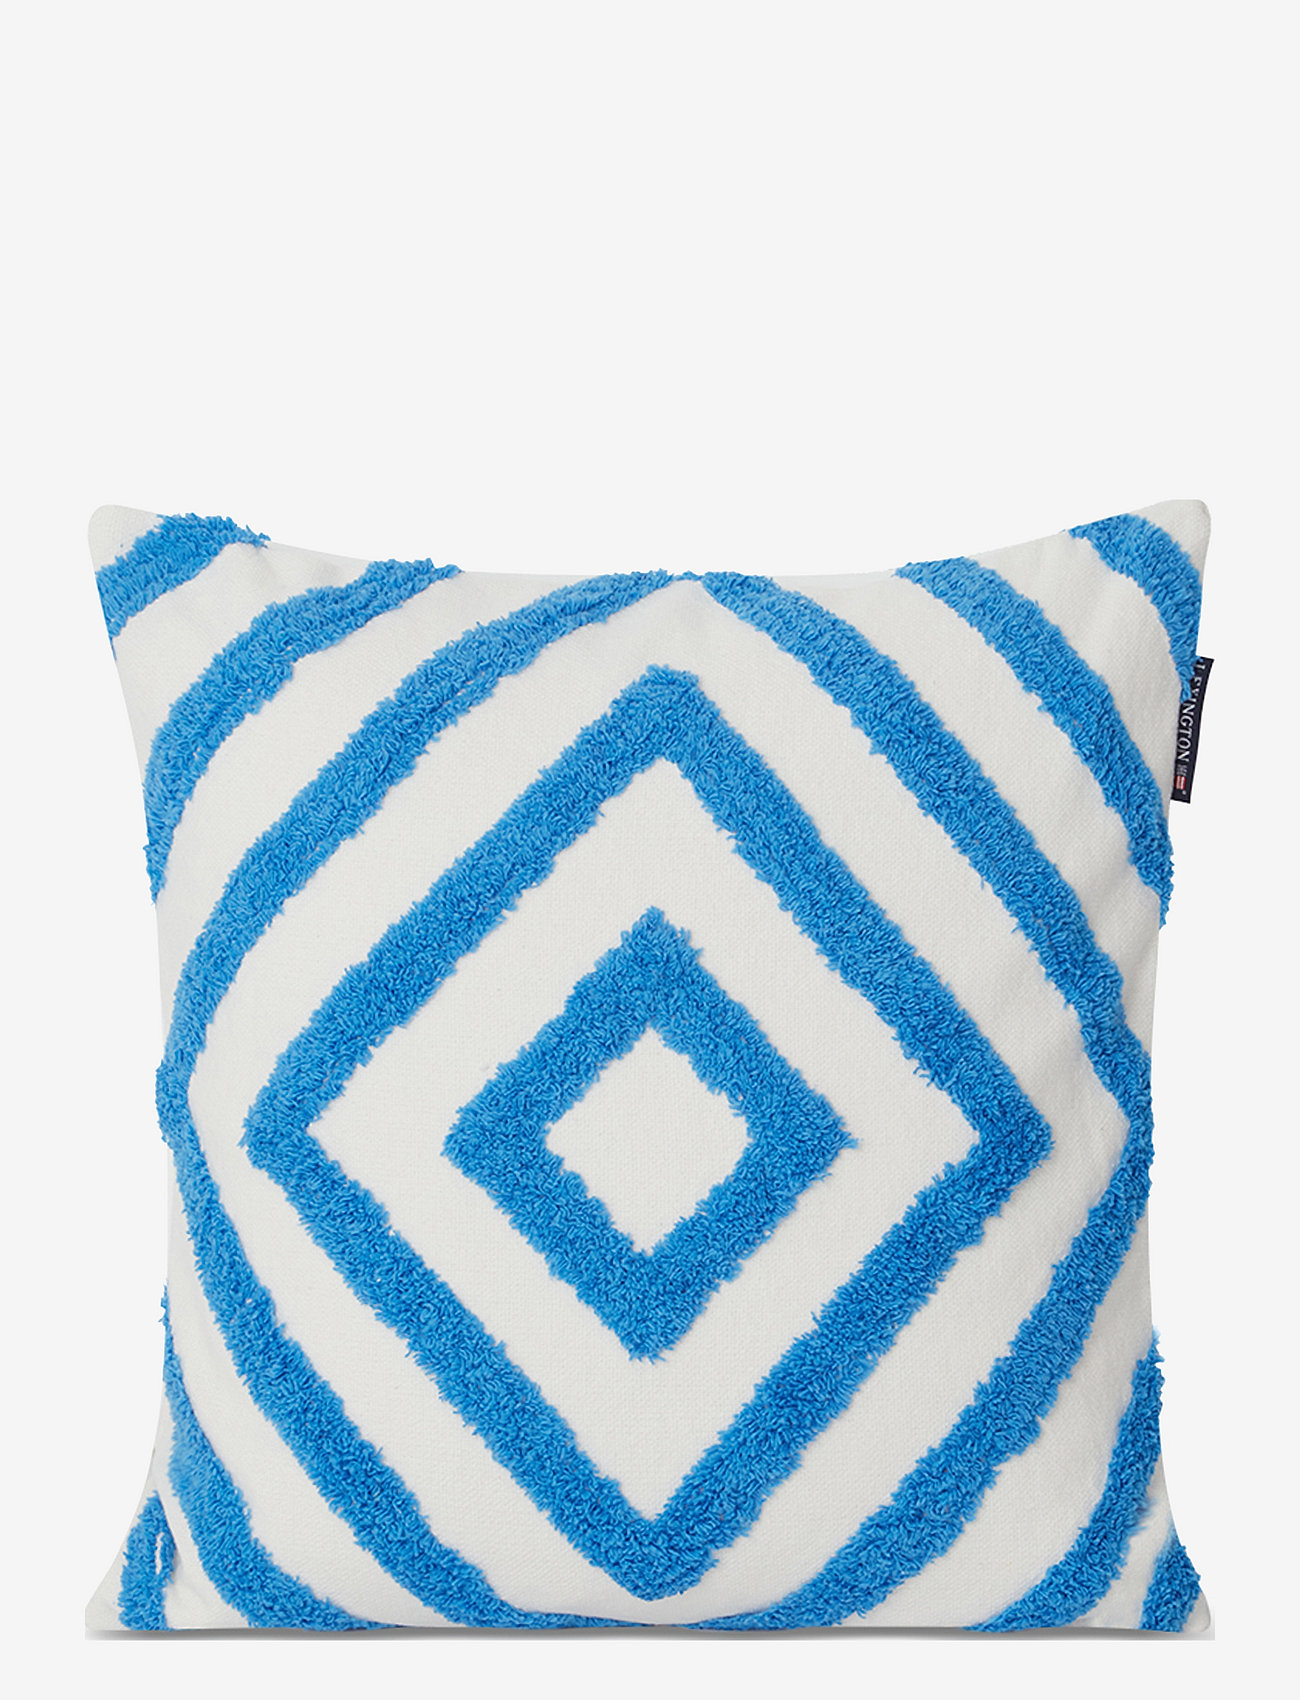 Lexington Home - Rug Graphic Recycled Cotton Canvas Pillow Cover - padjakatted - white/blue - 0